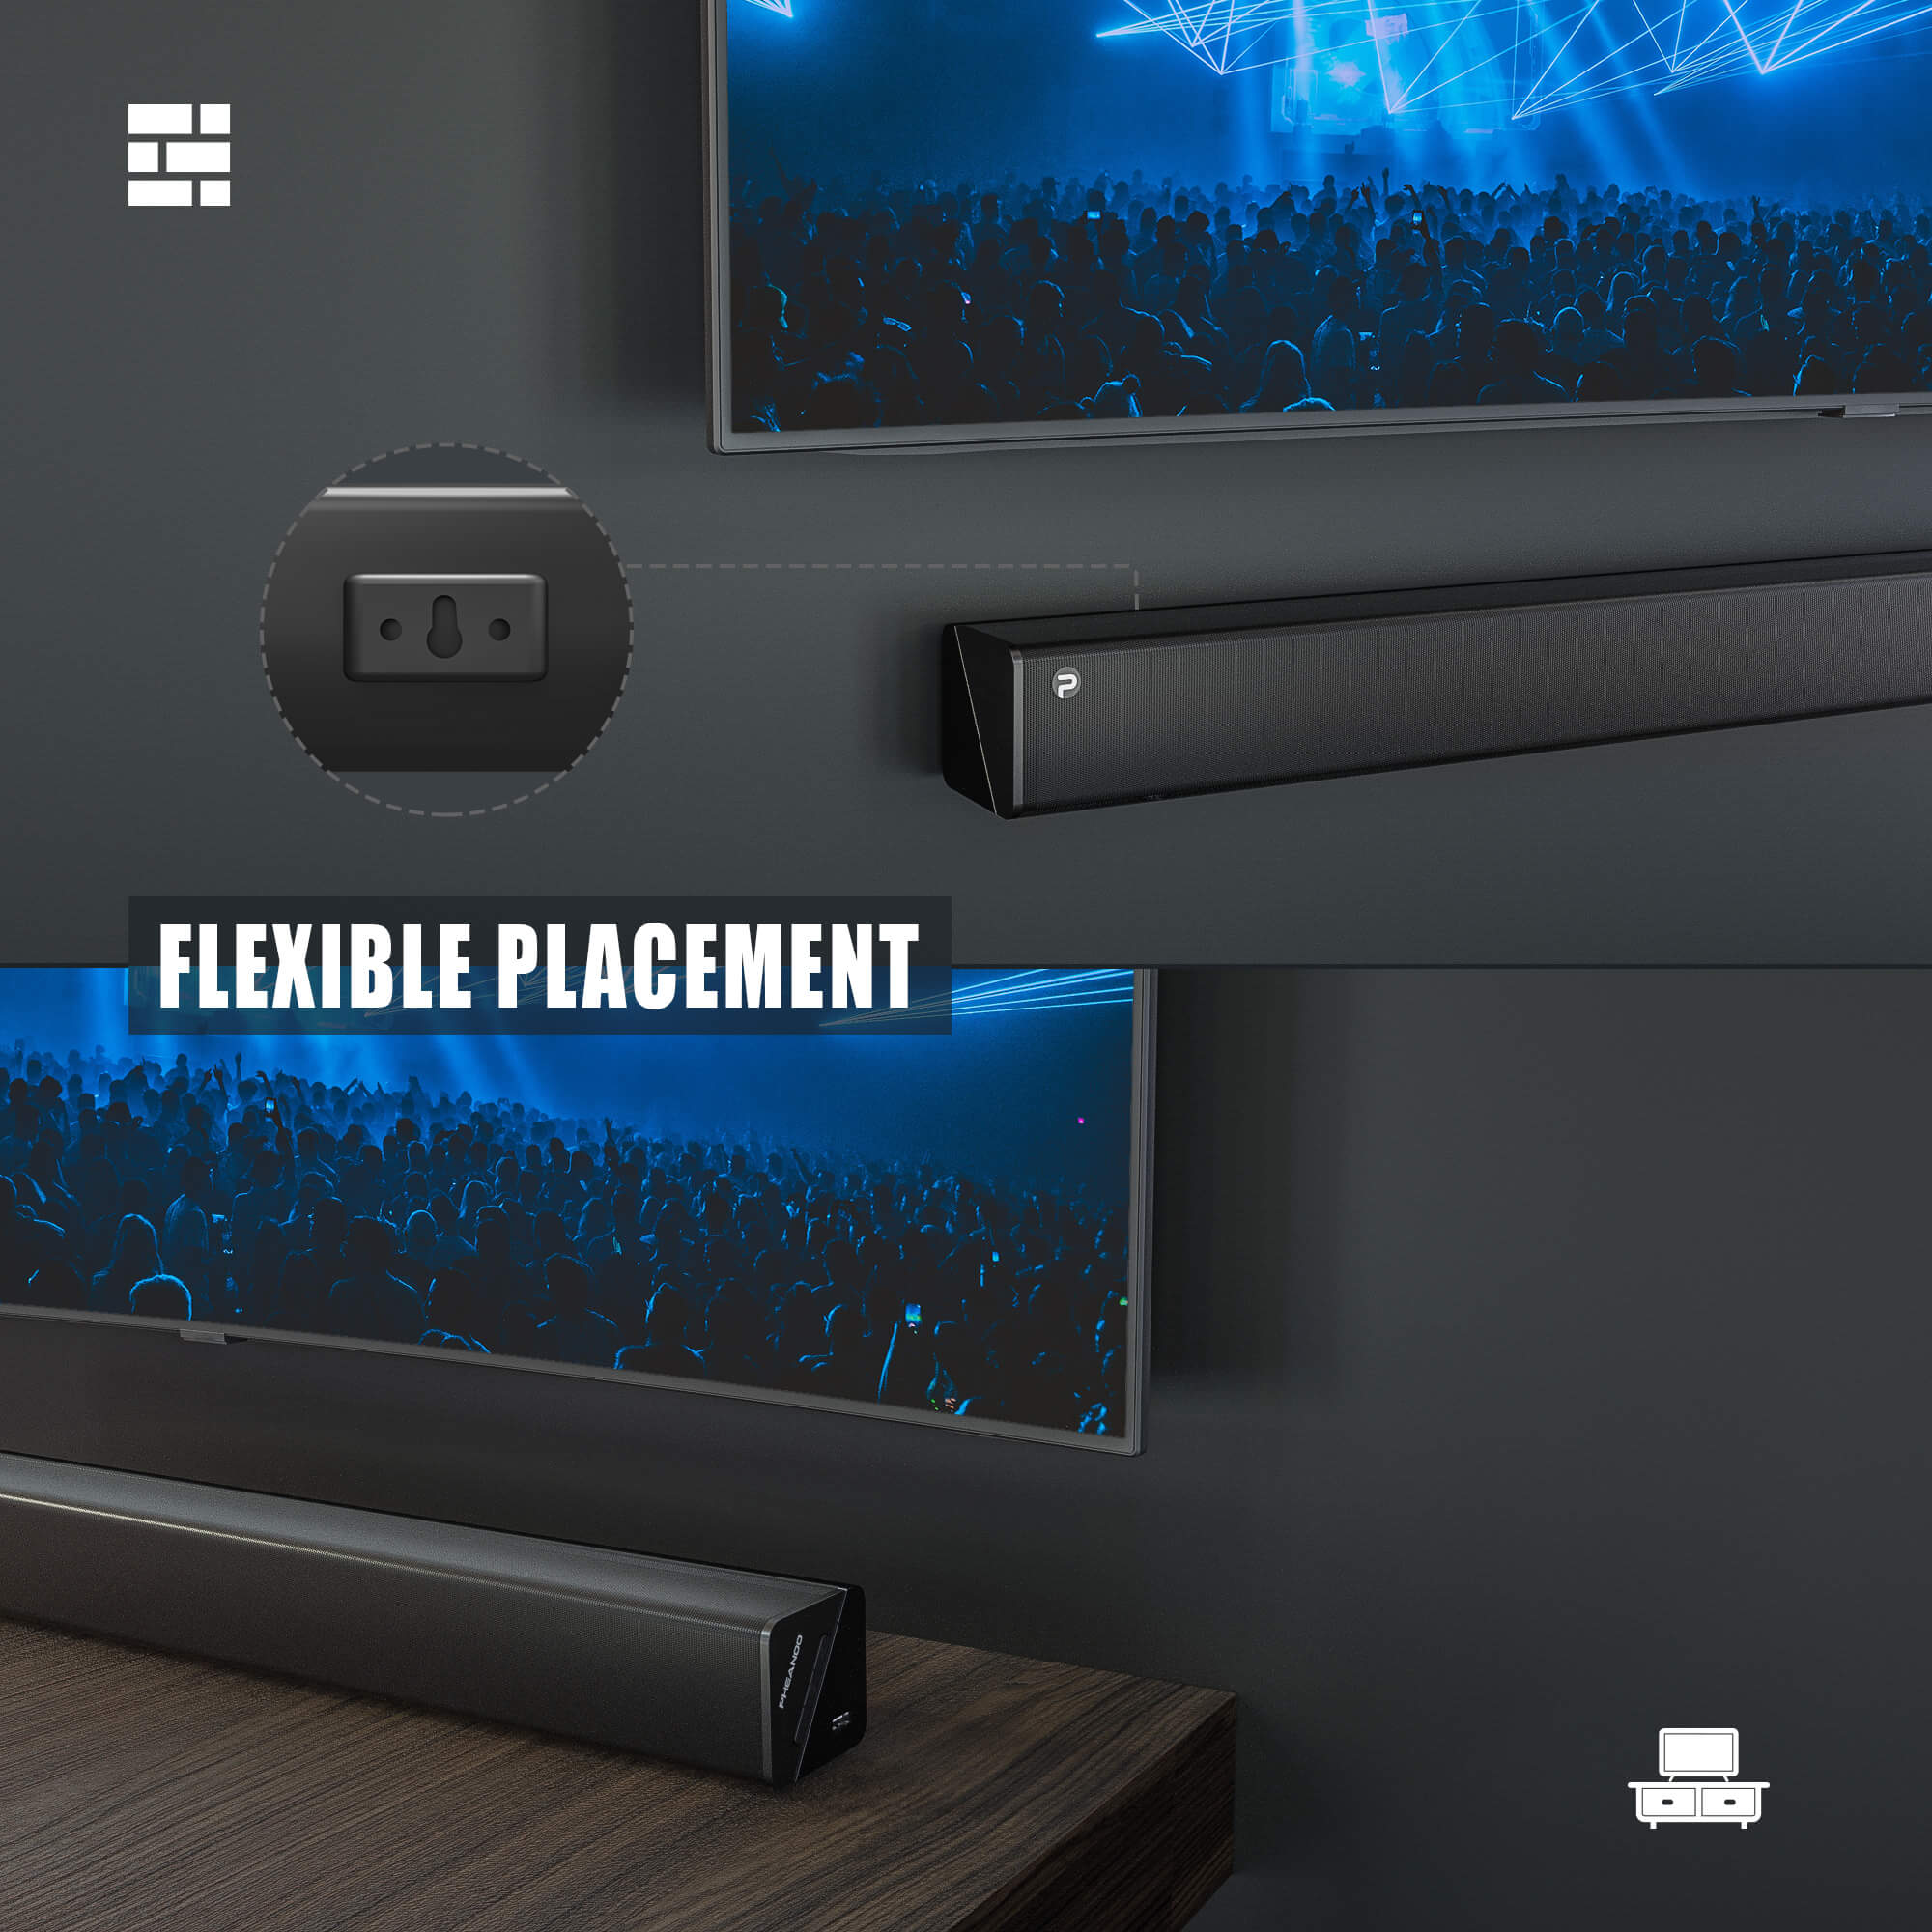 Pheanoo Audio Ltd Introduces New Sense of Sound Bars With Top-Notch Quality Features To Enjoy Top Sound Experience